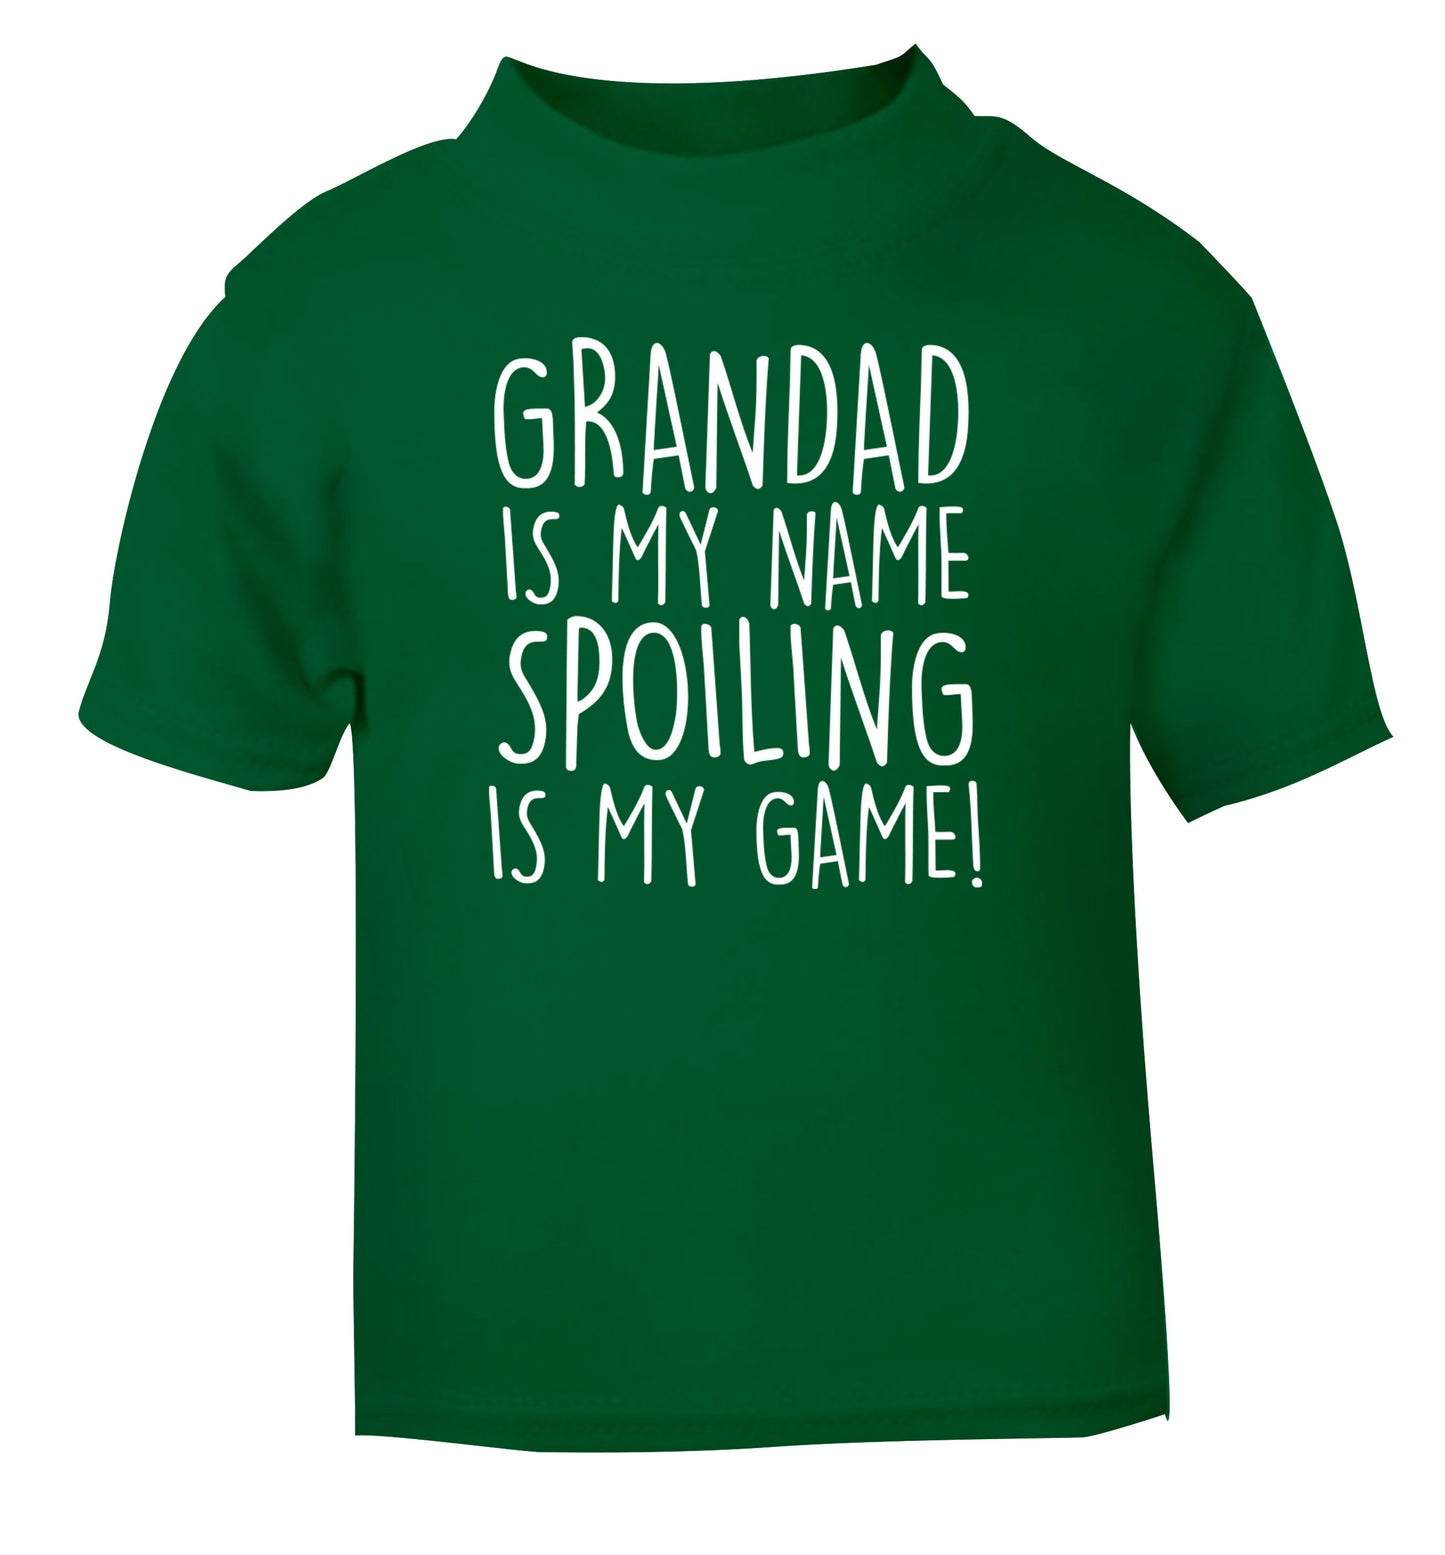 Grandad is my name, spoiling is my game green Baby Toddler Tshirt 2 Years